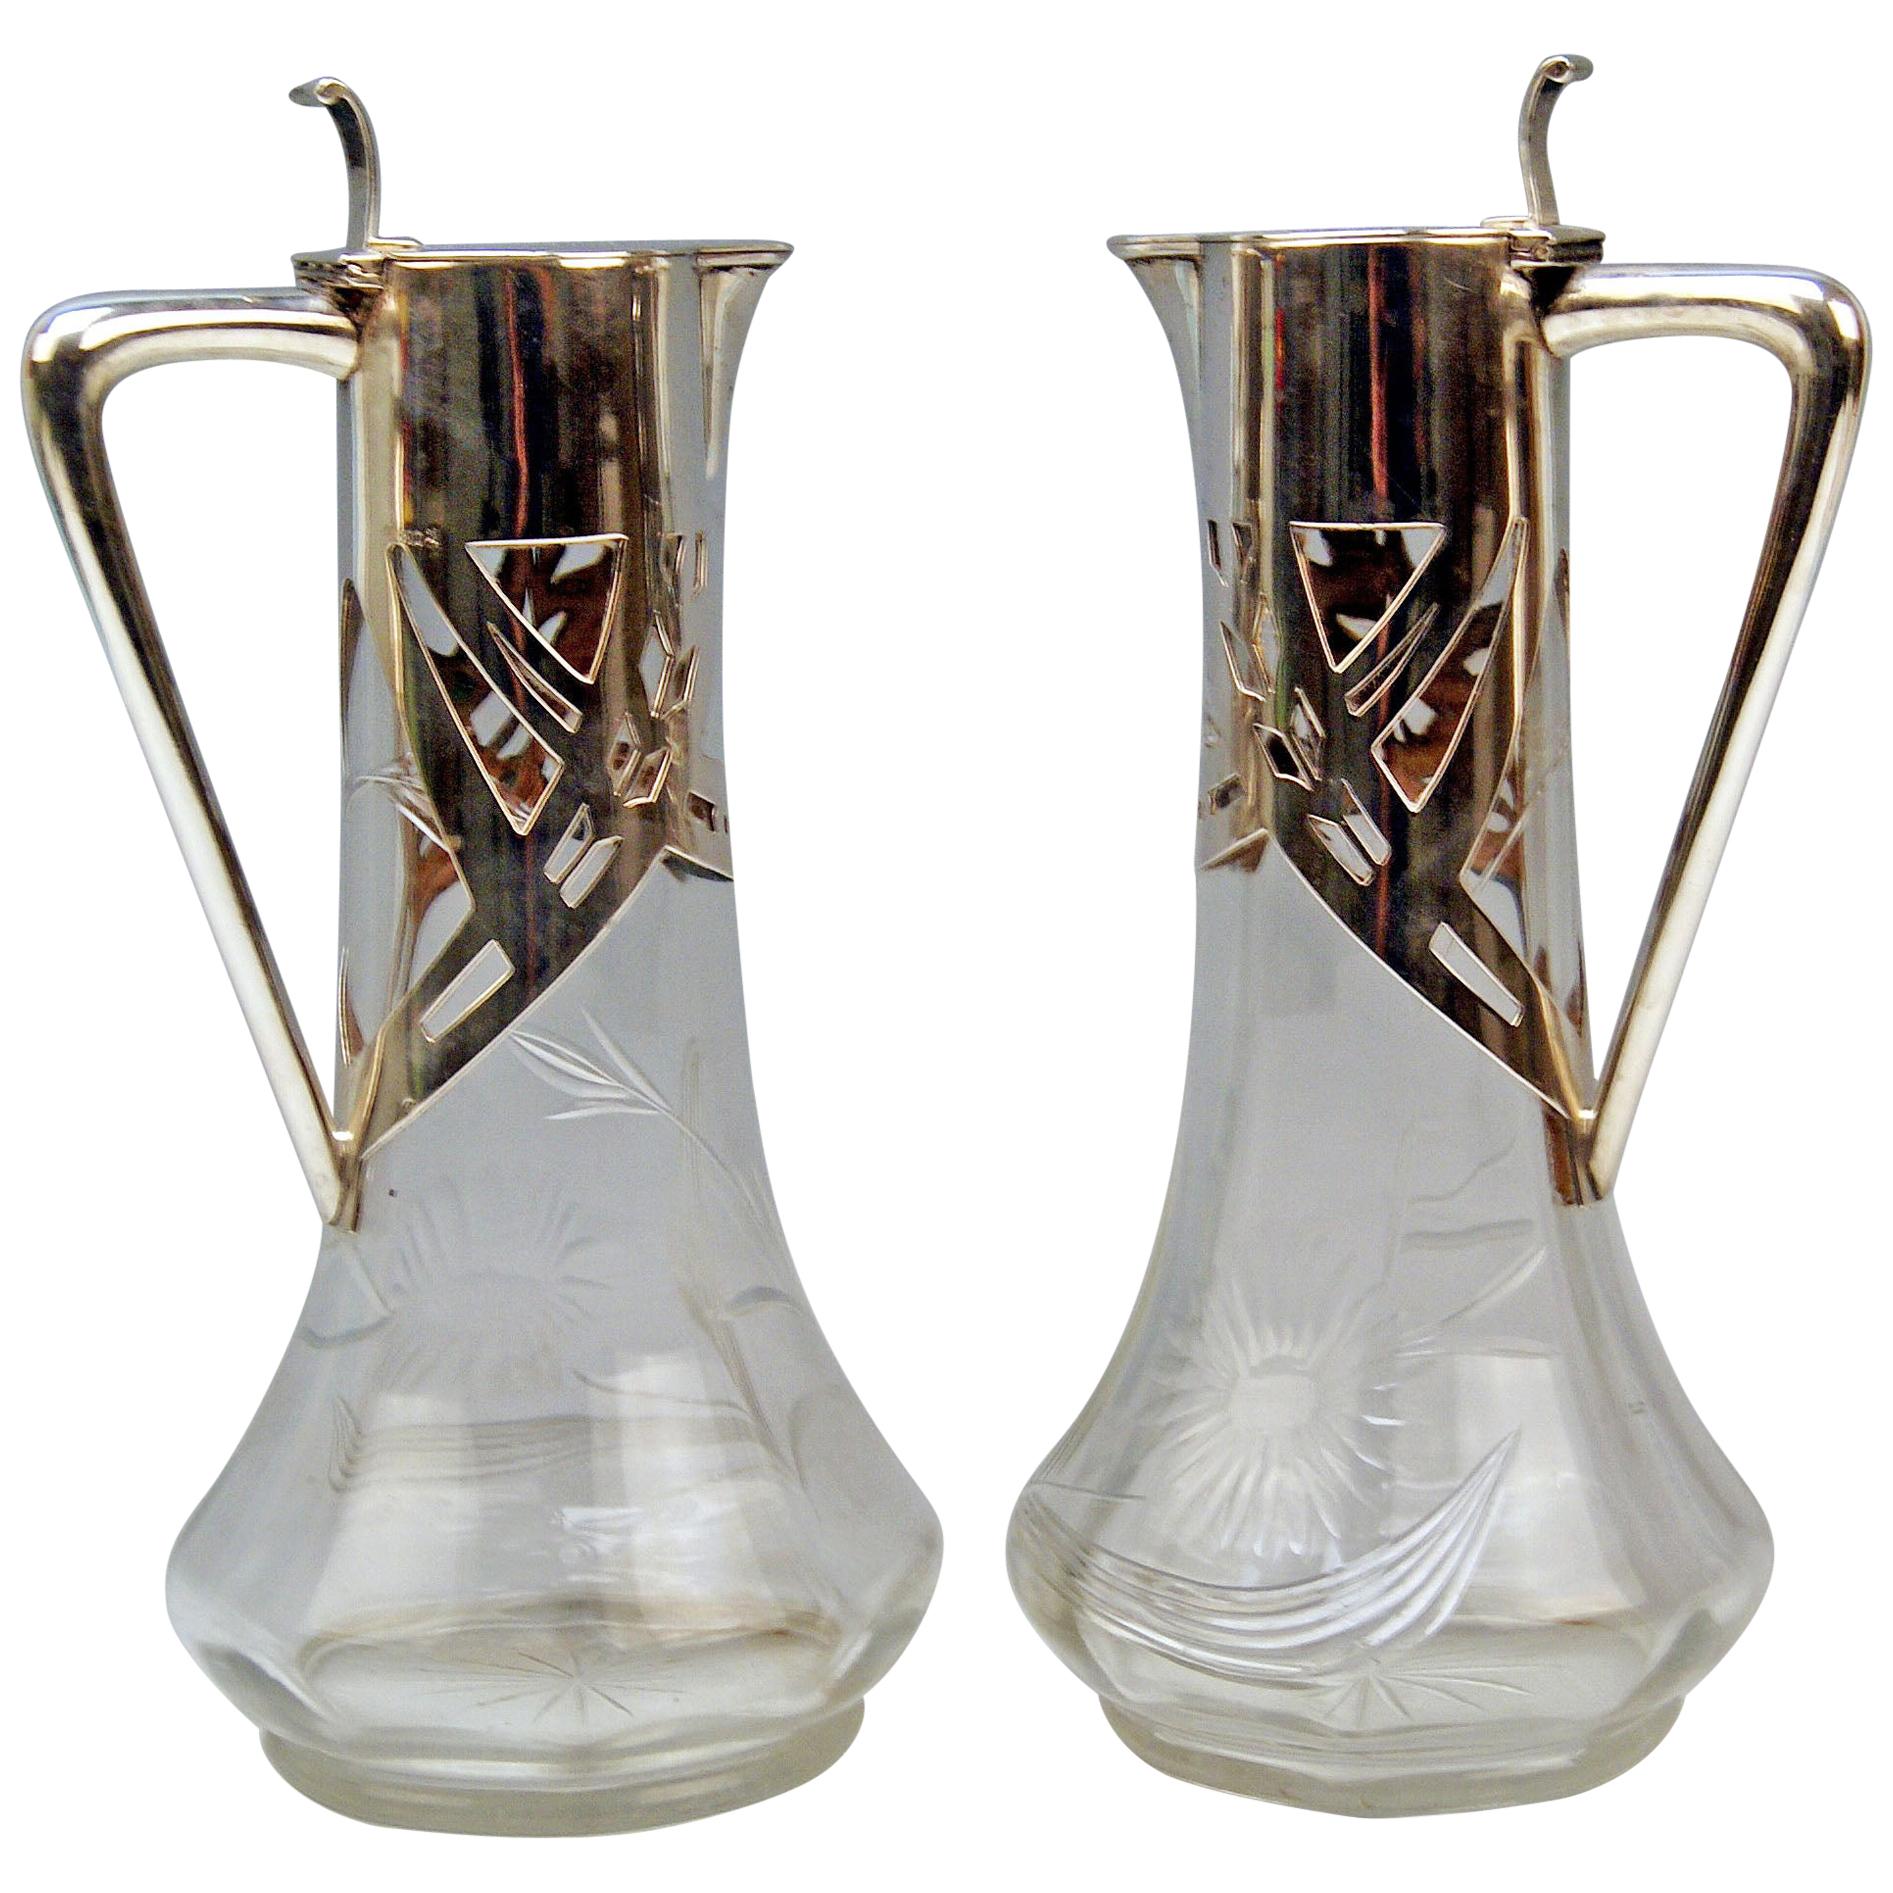 Silver 800 Art Nouveau Pair of Glass Decanters Deyhle Brothers, Germany, 1900